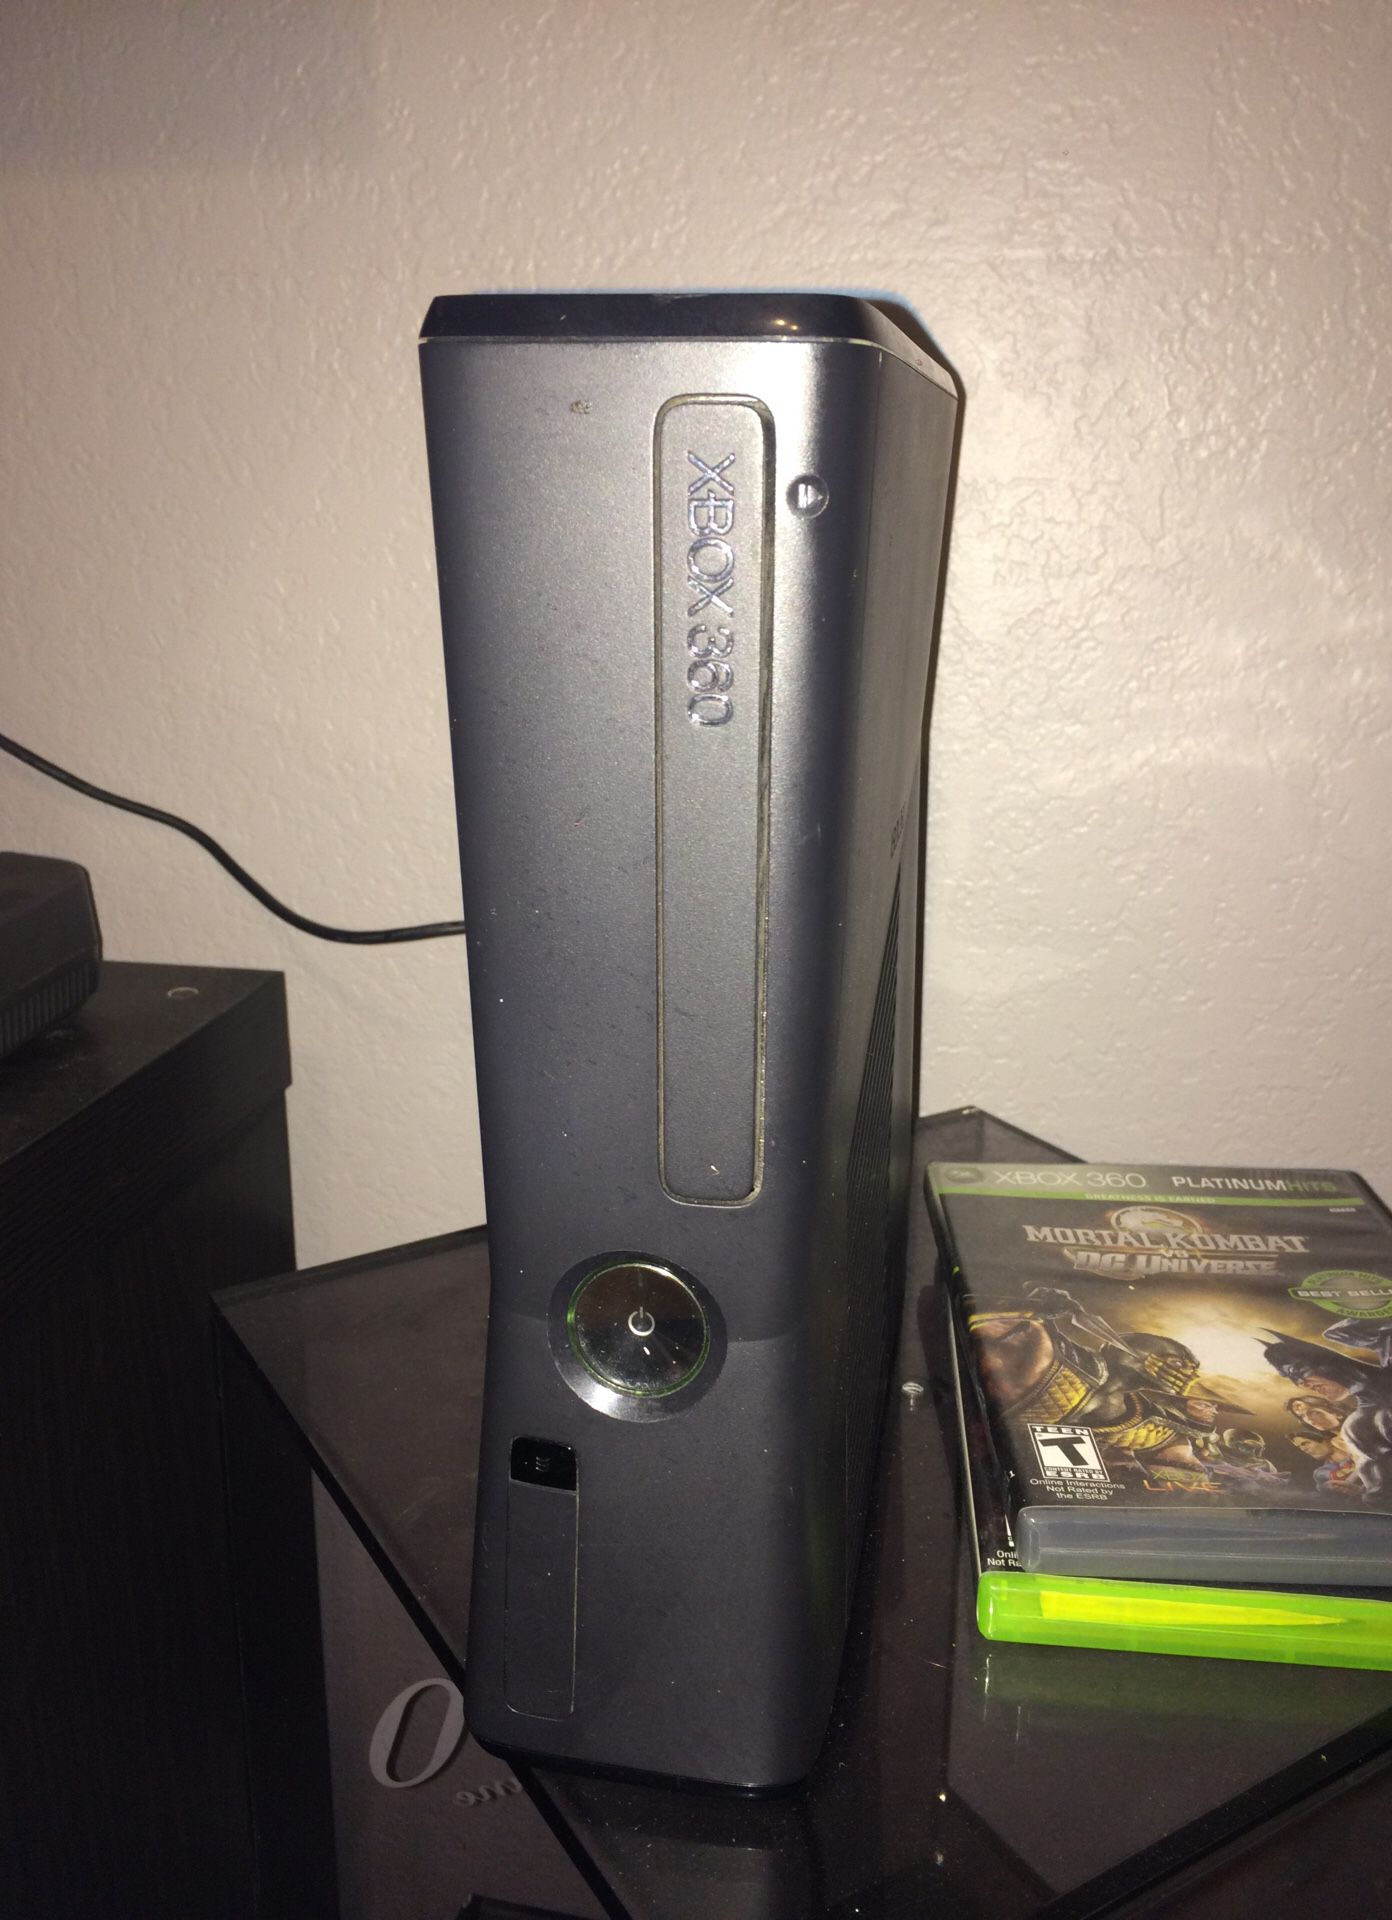 Xbox 360 black slim edition with additional internal 250 GB hard drive that’s jail broke for Xbox live so you don’t have to pay